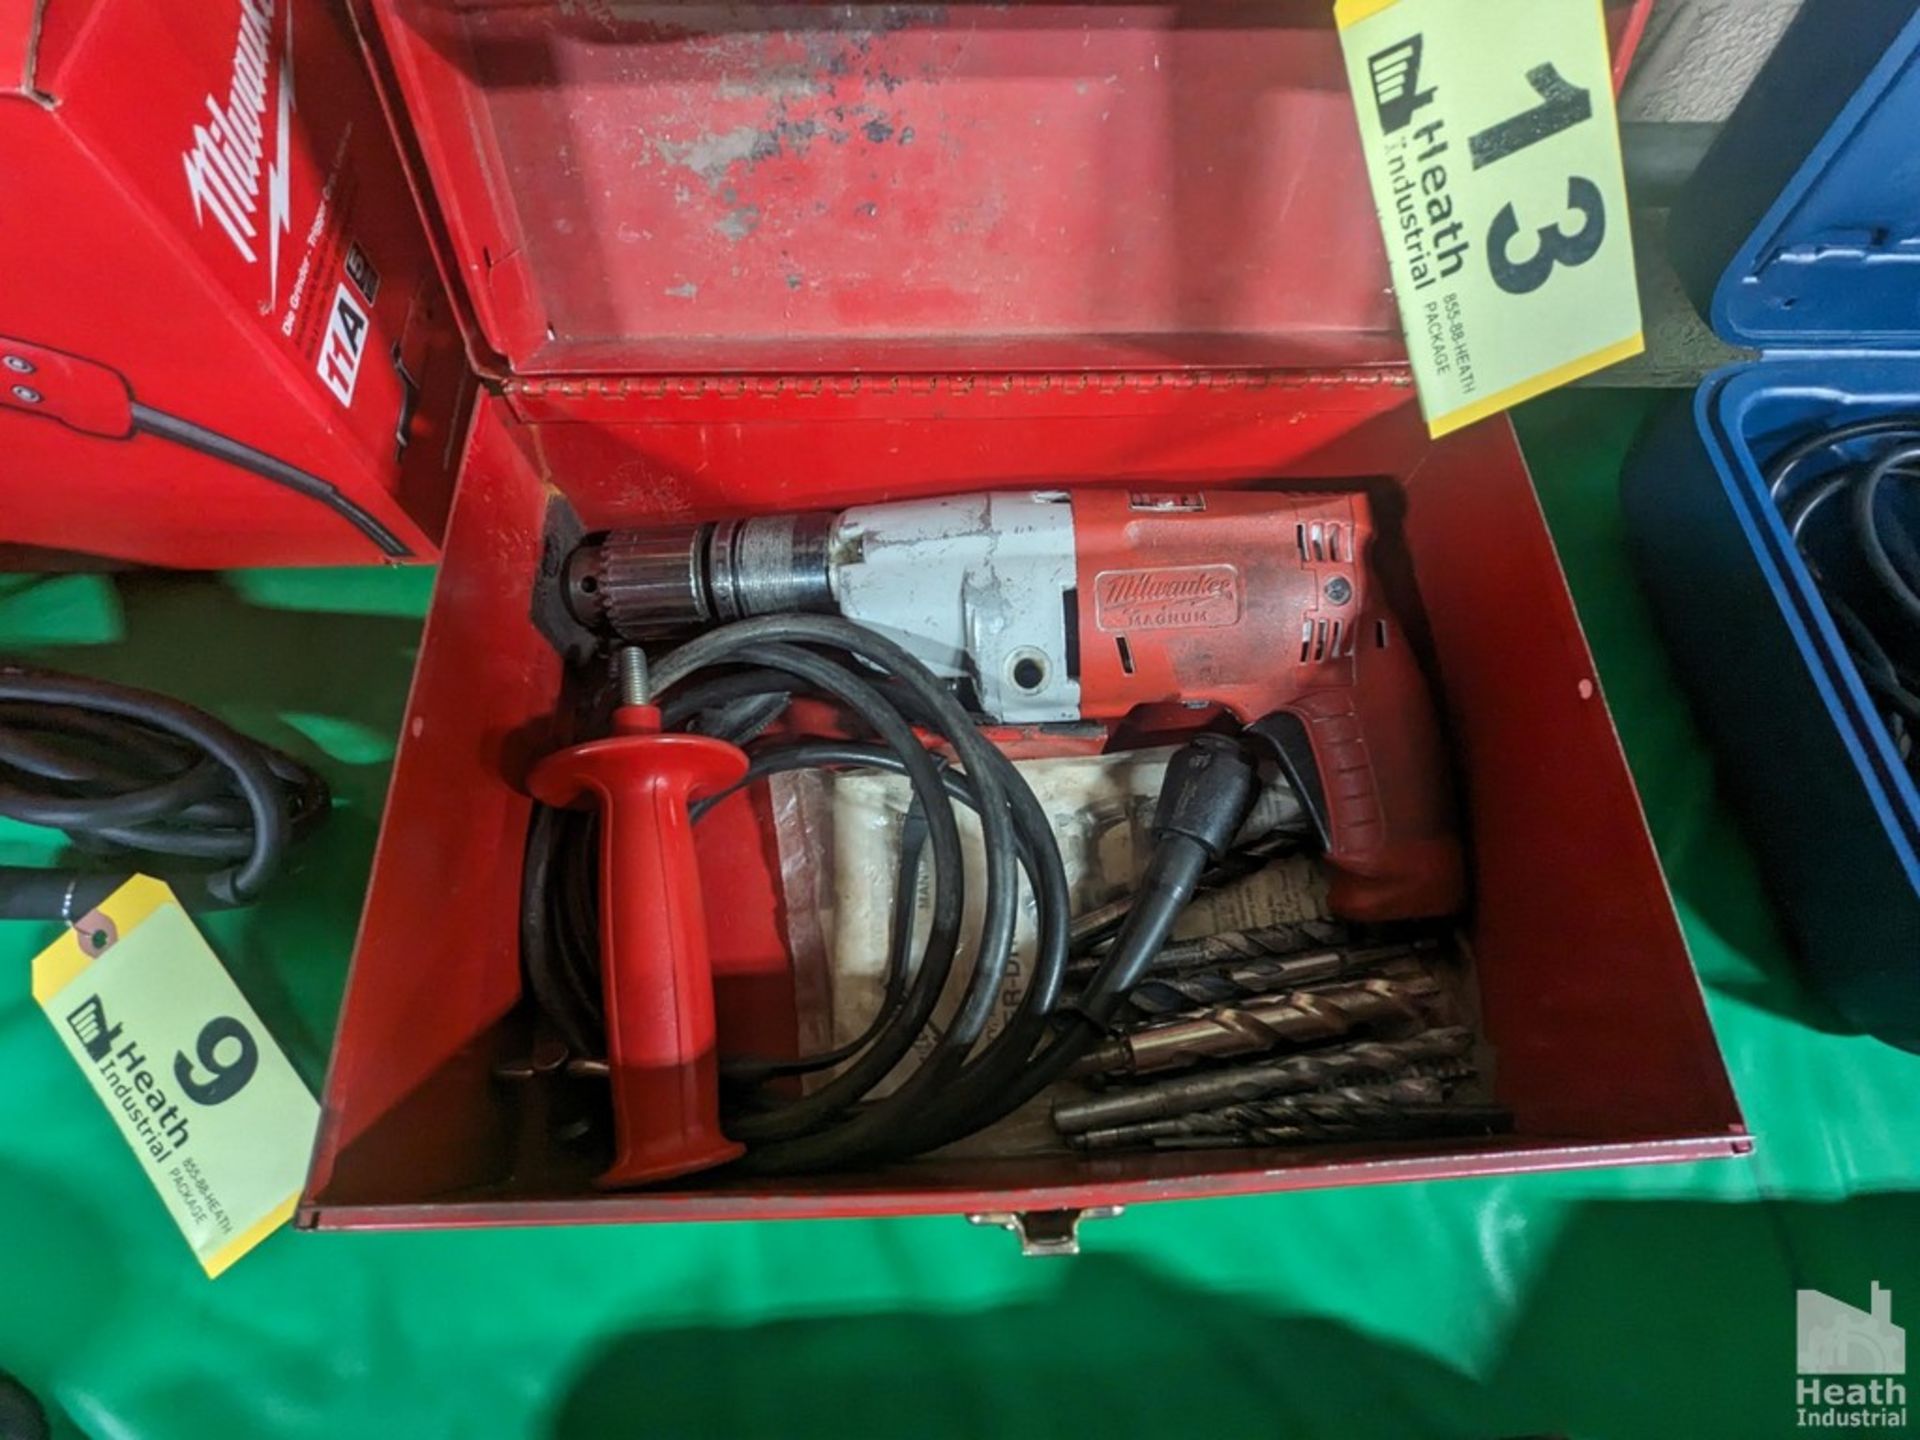 MILWAUKEE 5370-1 1/2" MAGNUM HAMMER DRILL WITH CASE - Image 2 of 2